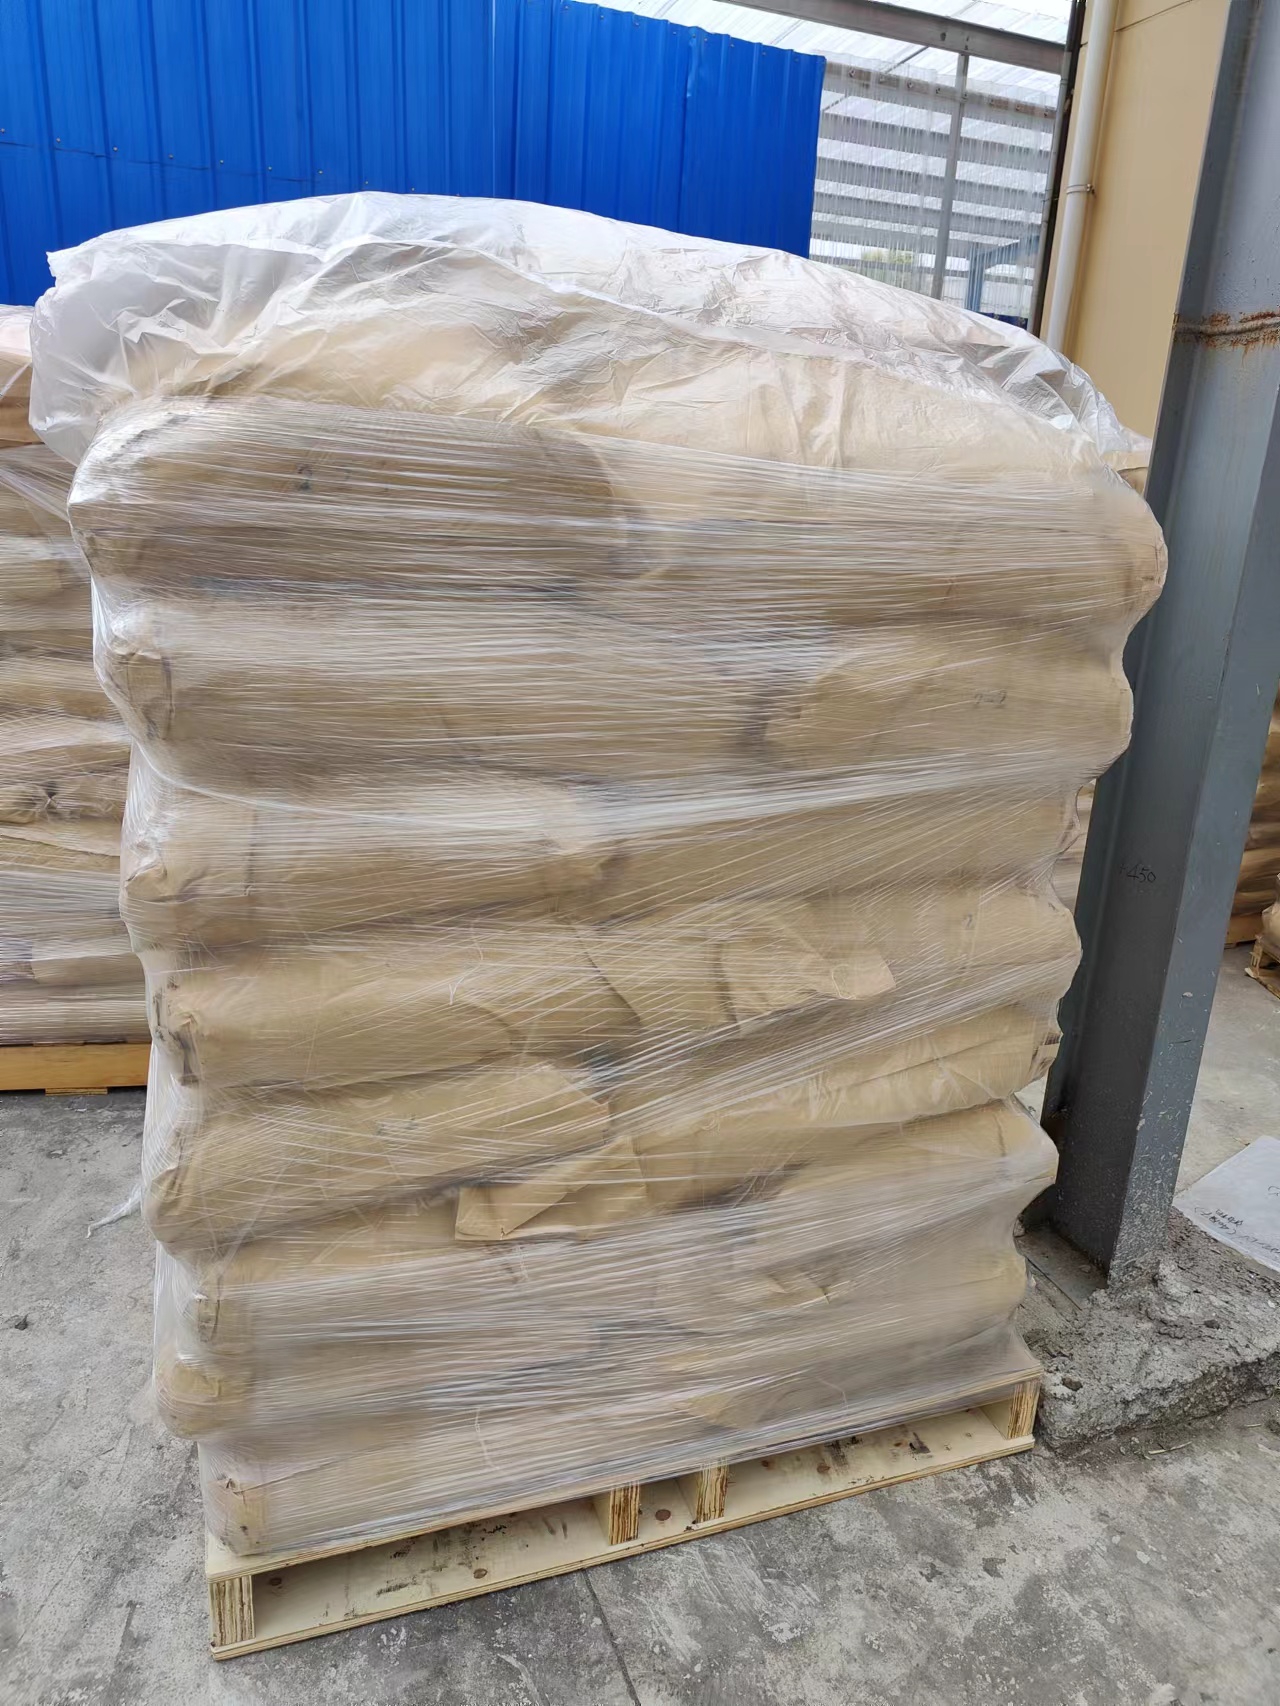 cmc packing 1000kg